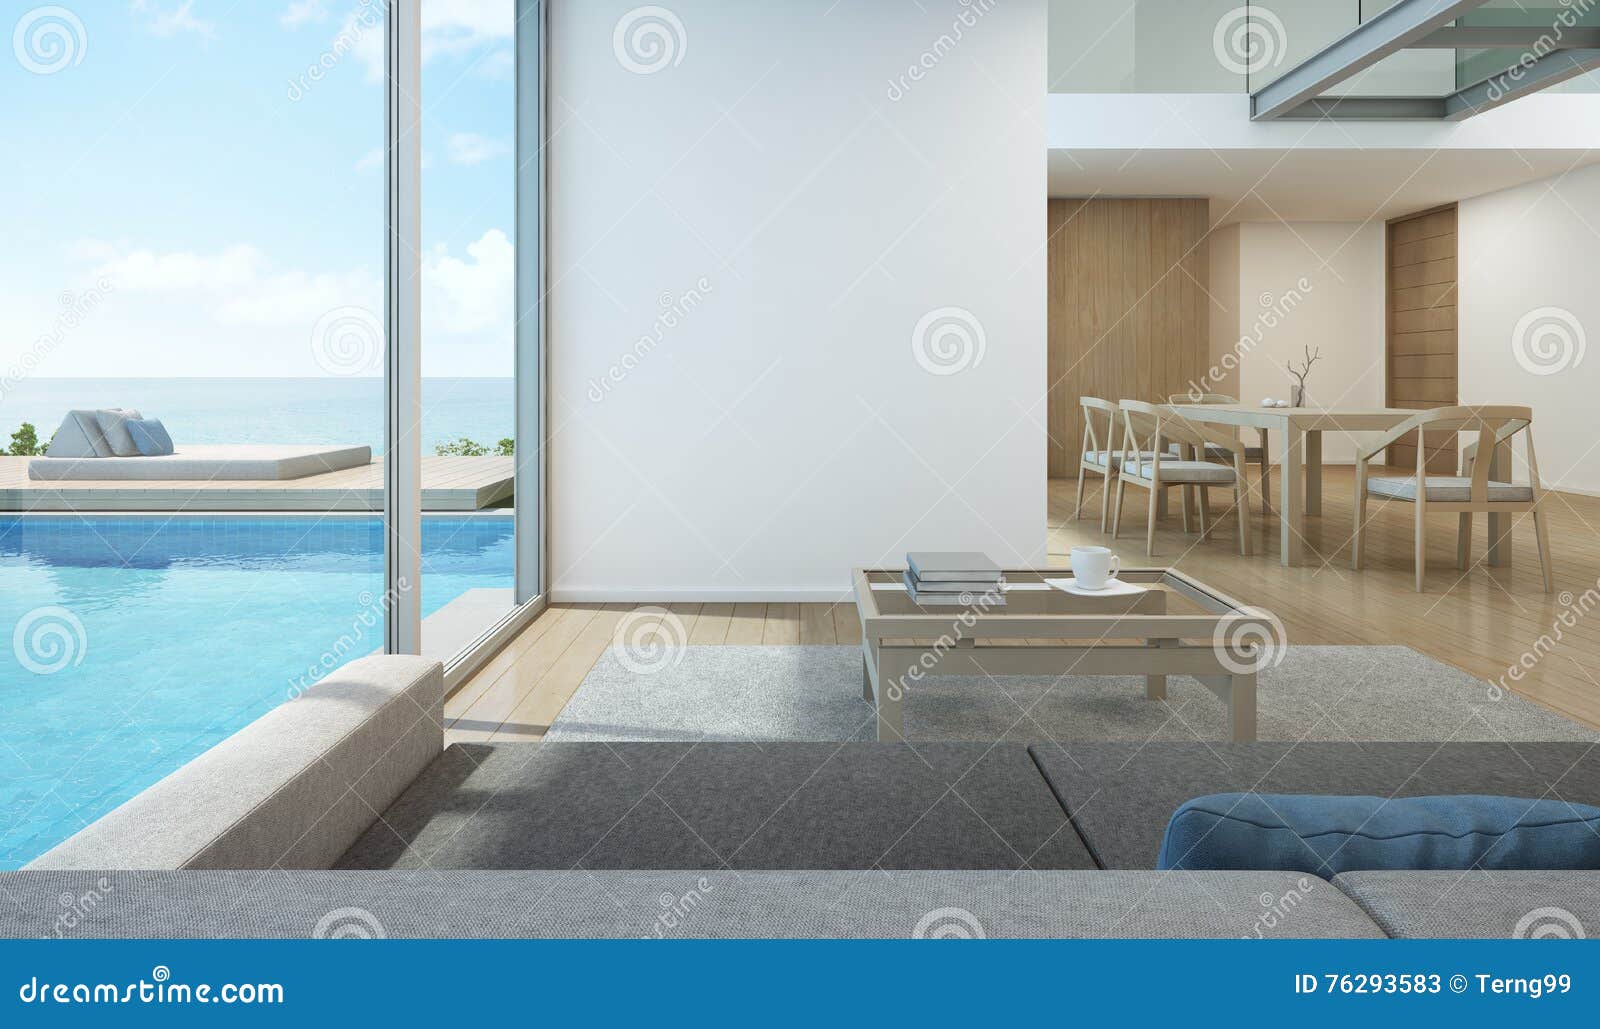 sea view living room and dining room in modern pool house